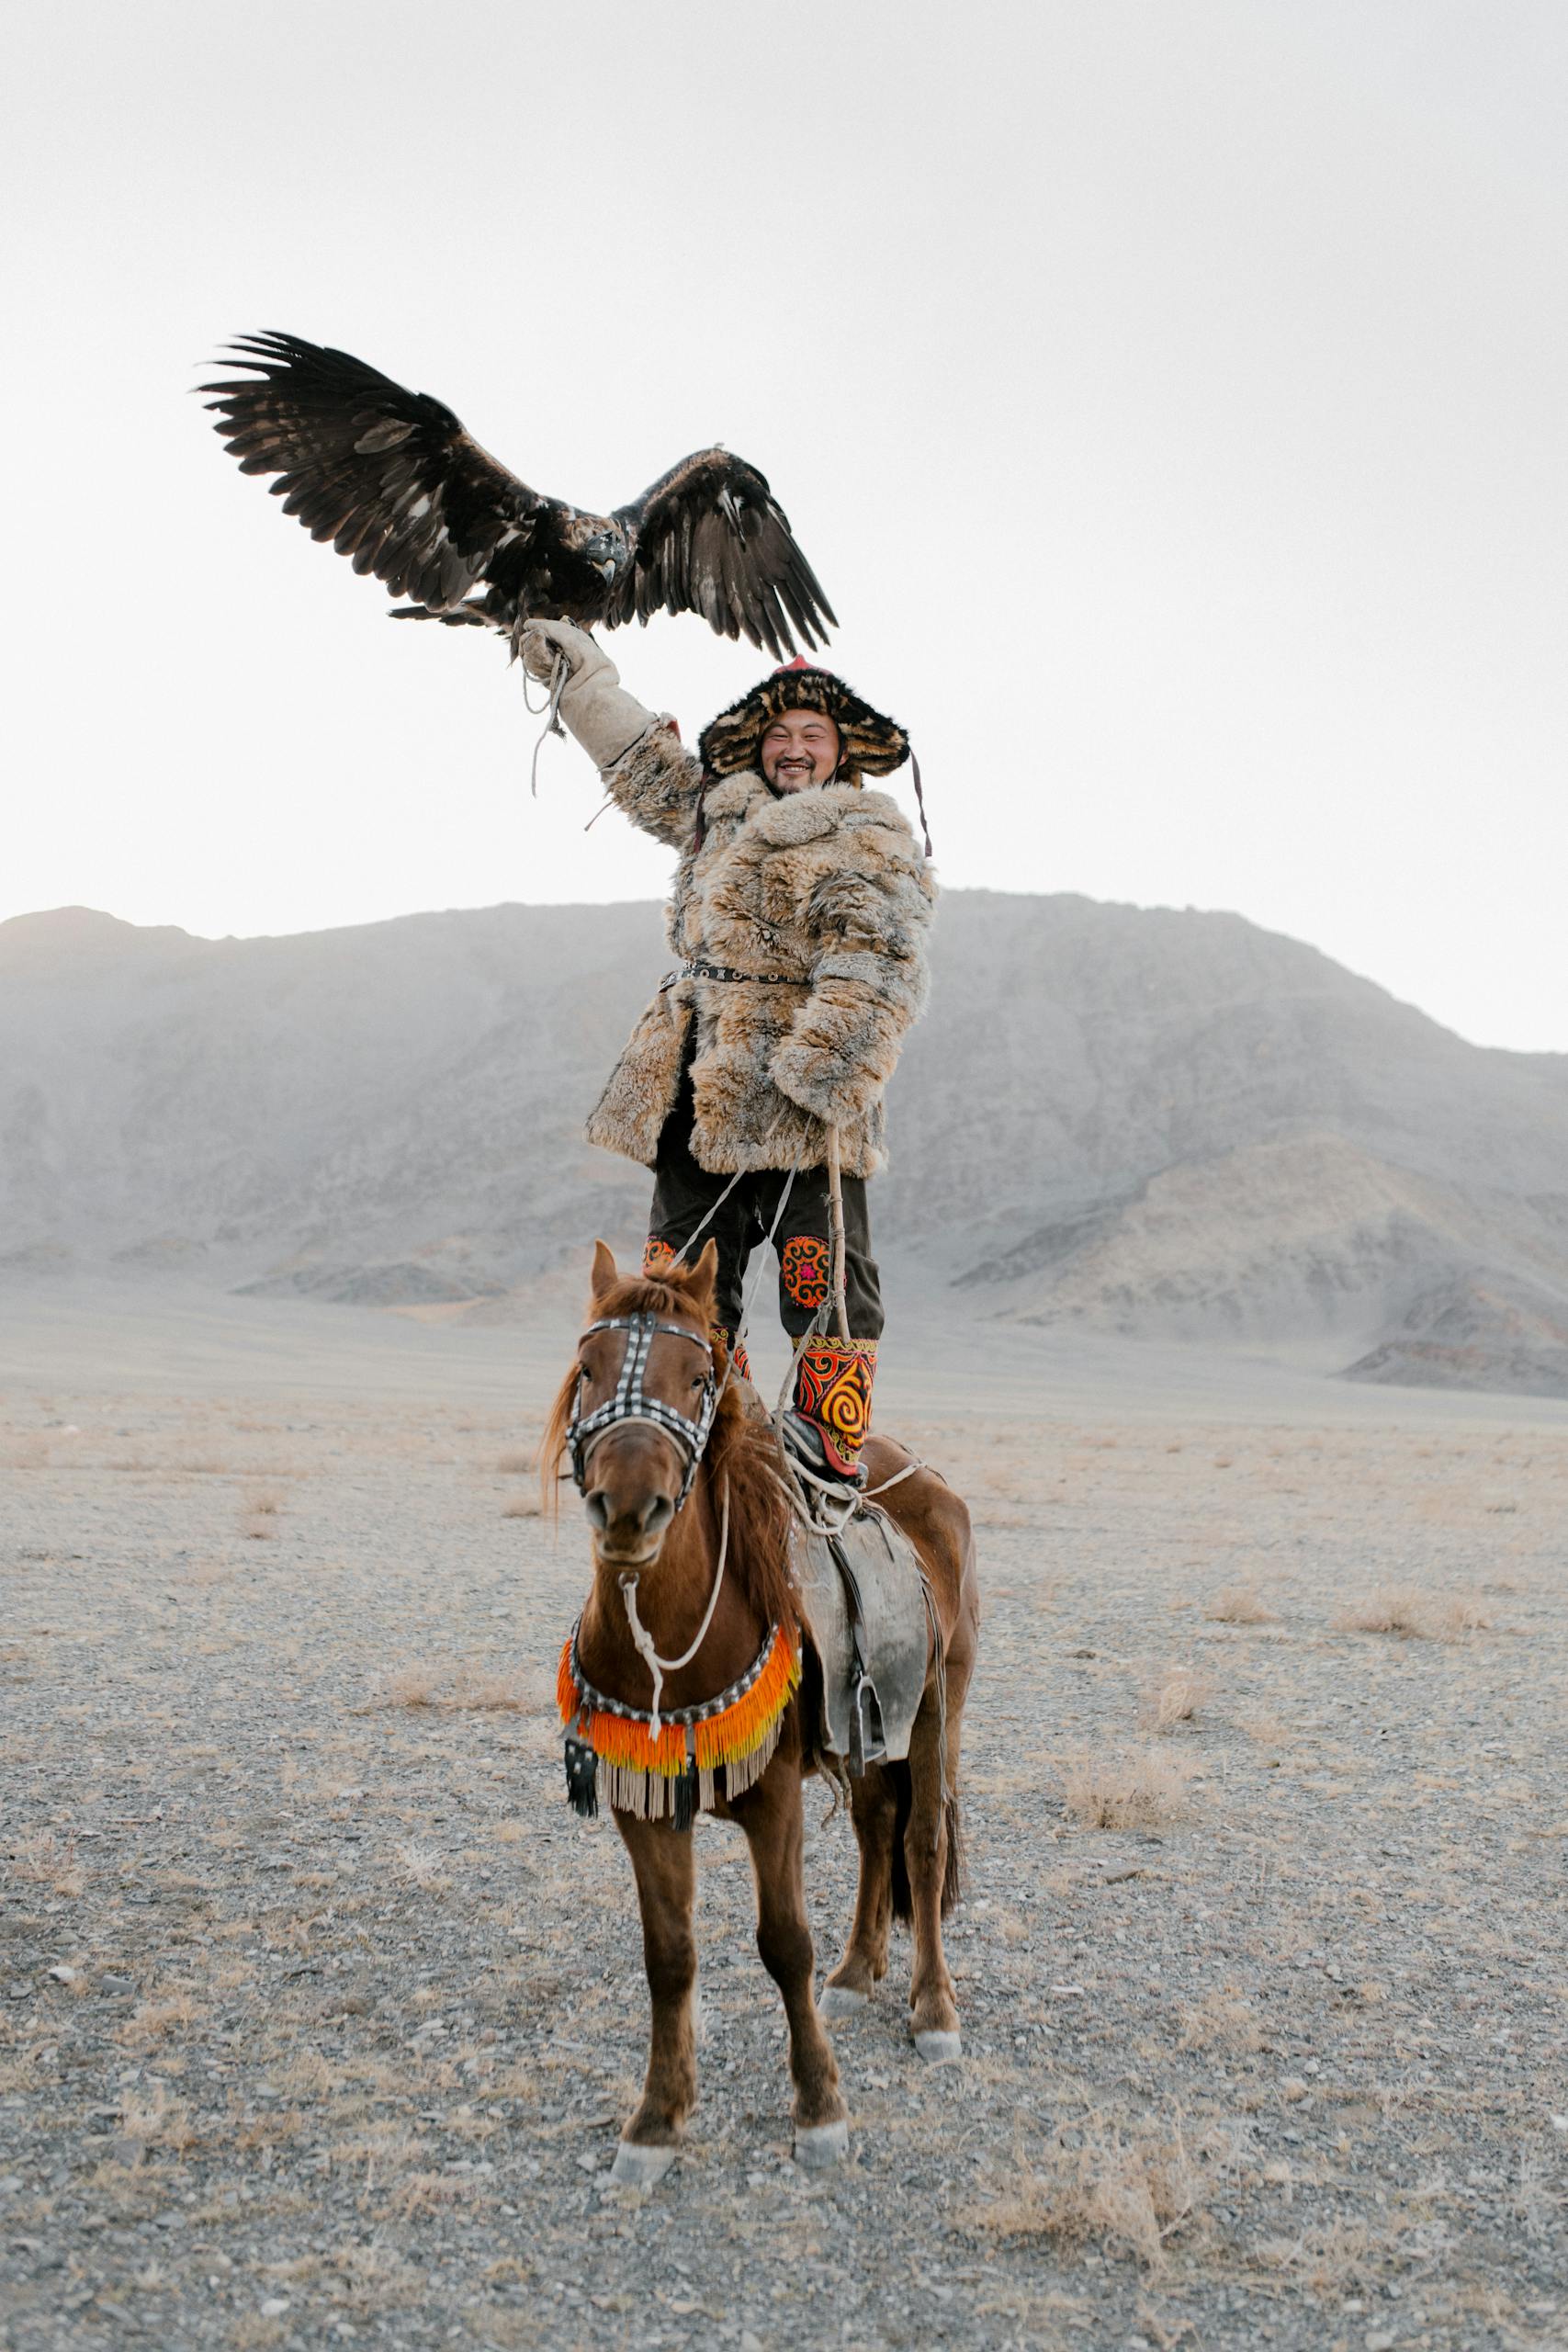 Hunter in Fur Coat Standing on Horse with Eagle on Hand